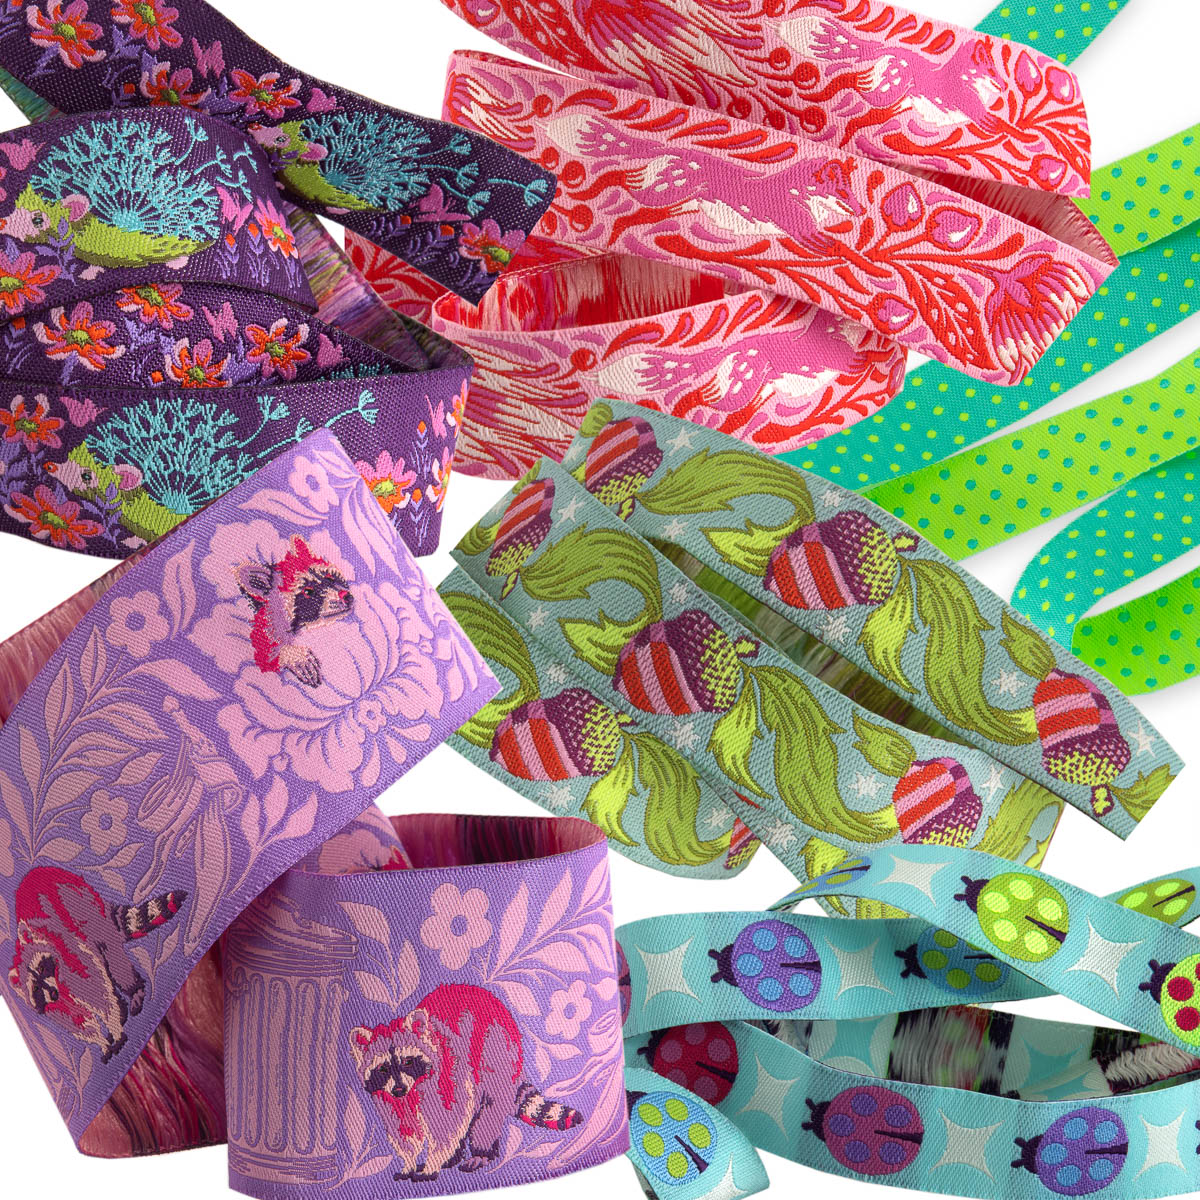 Tula Pink Designer Ribbon Pack - Content: 6 yds total -1 yd per design - Tiny Beasts is all about a playful reimagining of animals you might find in your backyard  and what they get up to after dark!  Glimmer colorway, pink and green.